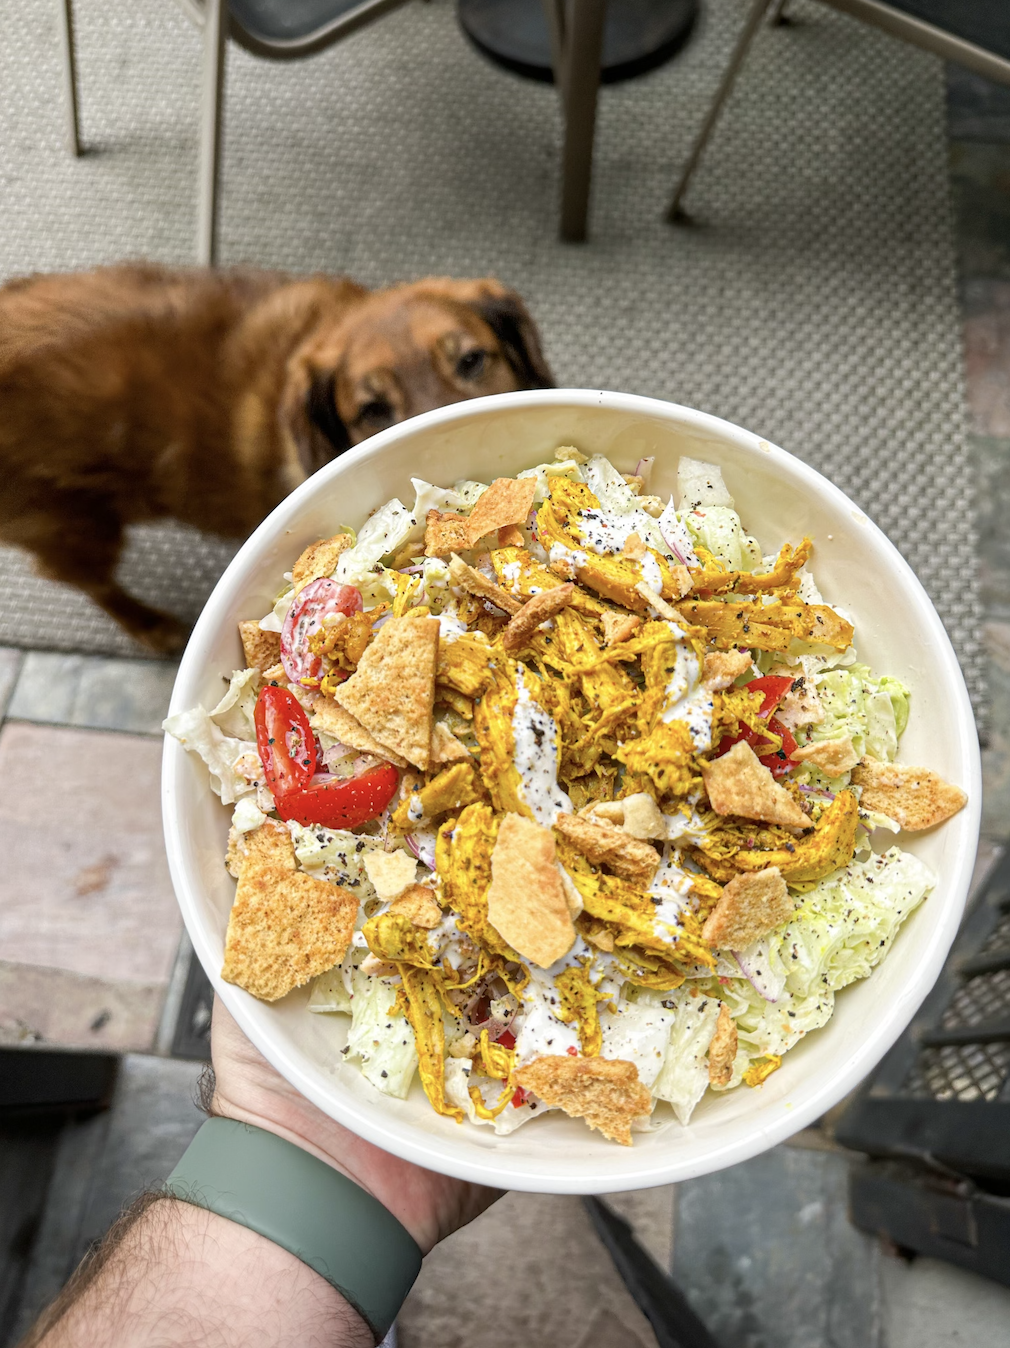 Person holding a bowl of halal cart chicken salad with dog looking up at it